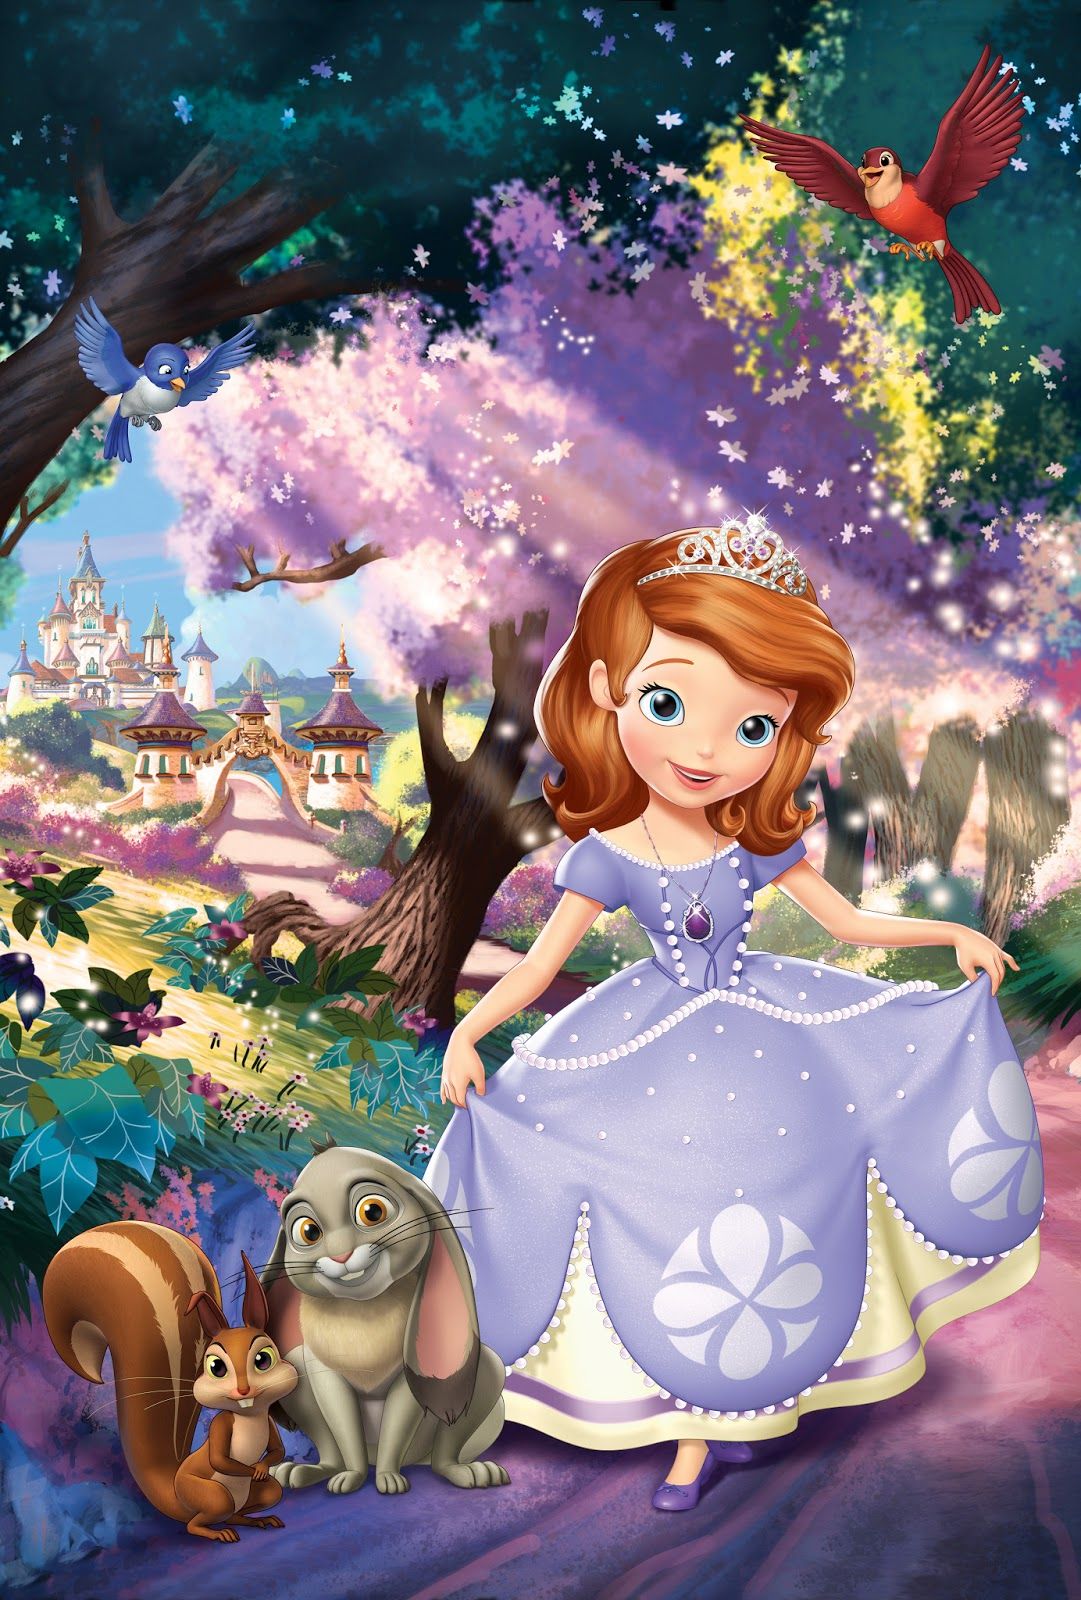 Sofia The First Aesthetic Wallpapers - Wallpaper Cave